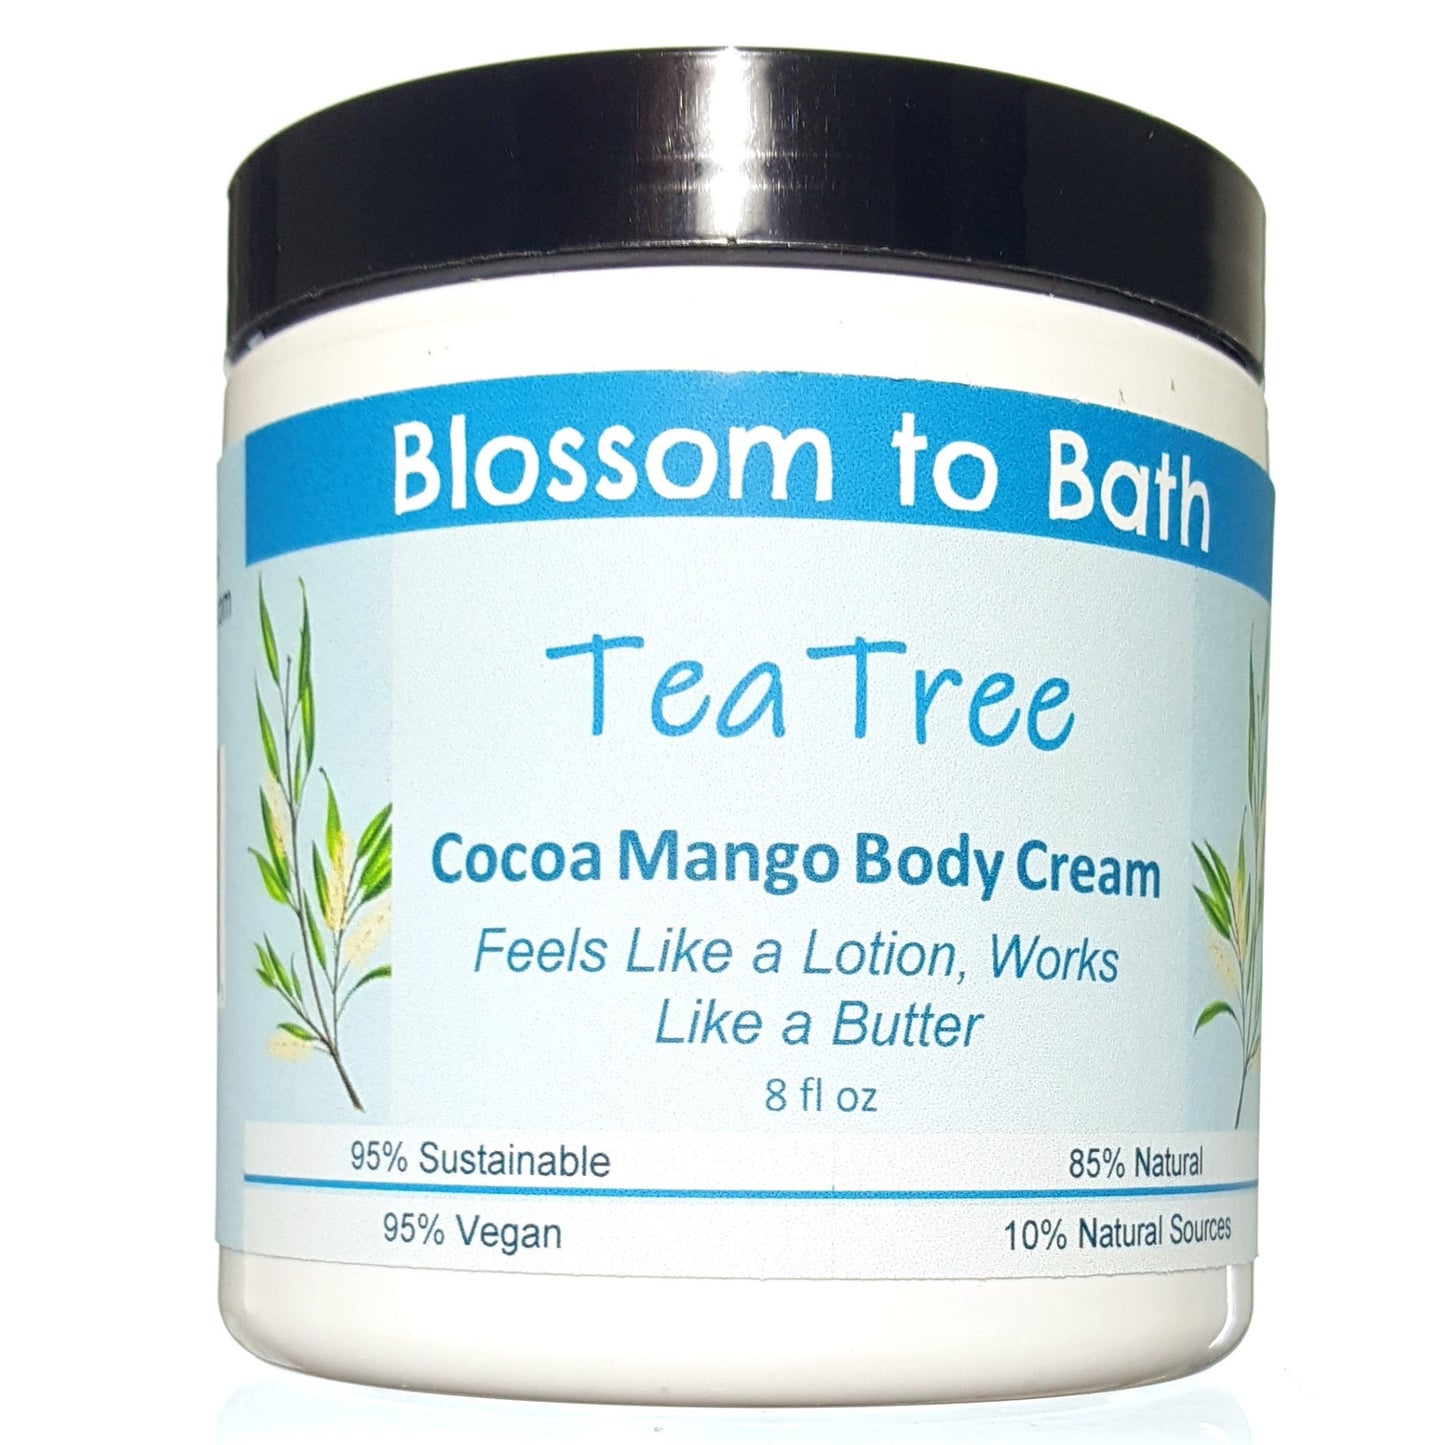 Buy Blossom to Bath Tea Tree Cocoa Mango Body Cream from Flowersong Soap Studio.  Rich organic butters luxury soften and moisturize even the roughest skin all day  Tea tree's fresh fragrance embodies a deep down clean.